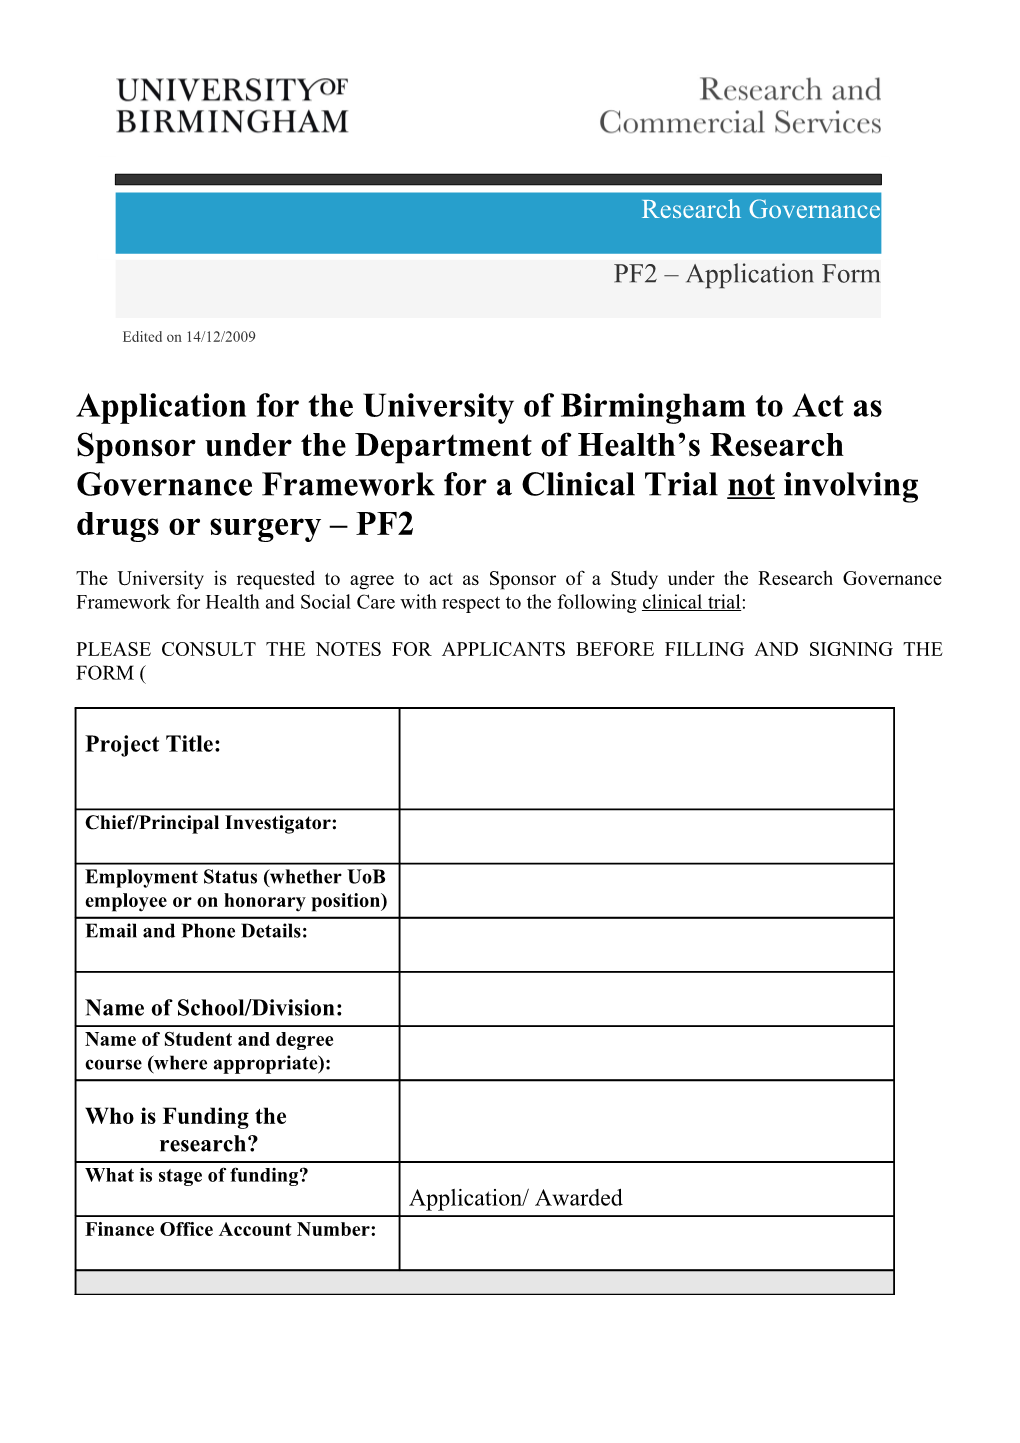 Application for the University of Birmingham to Act As Sponsor Under the Department Of